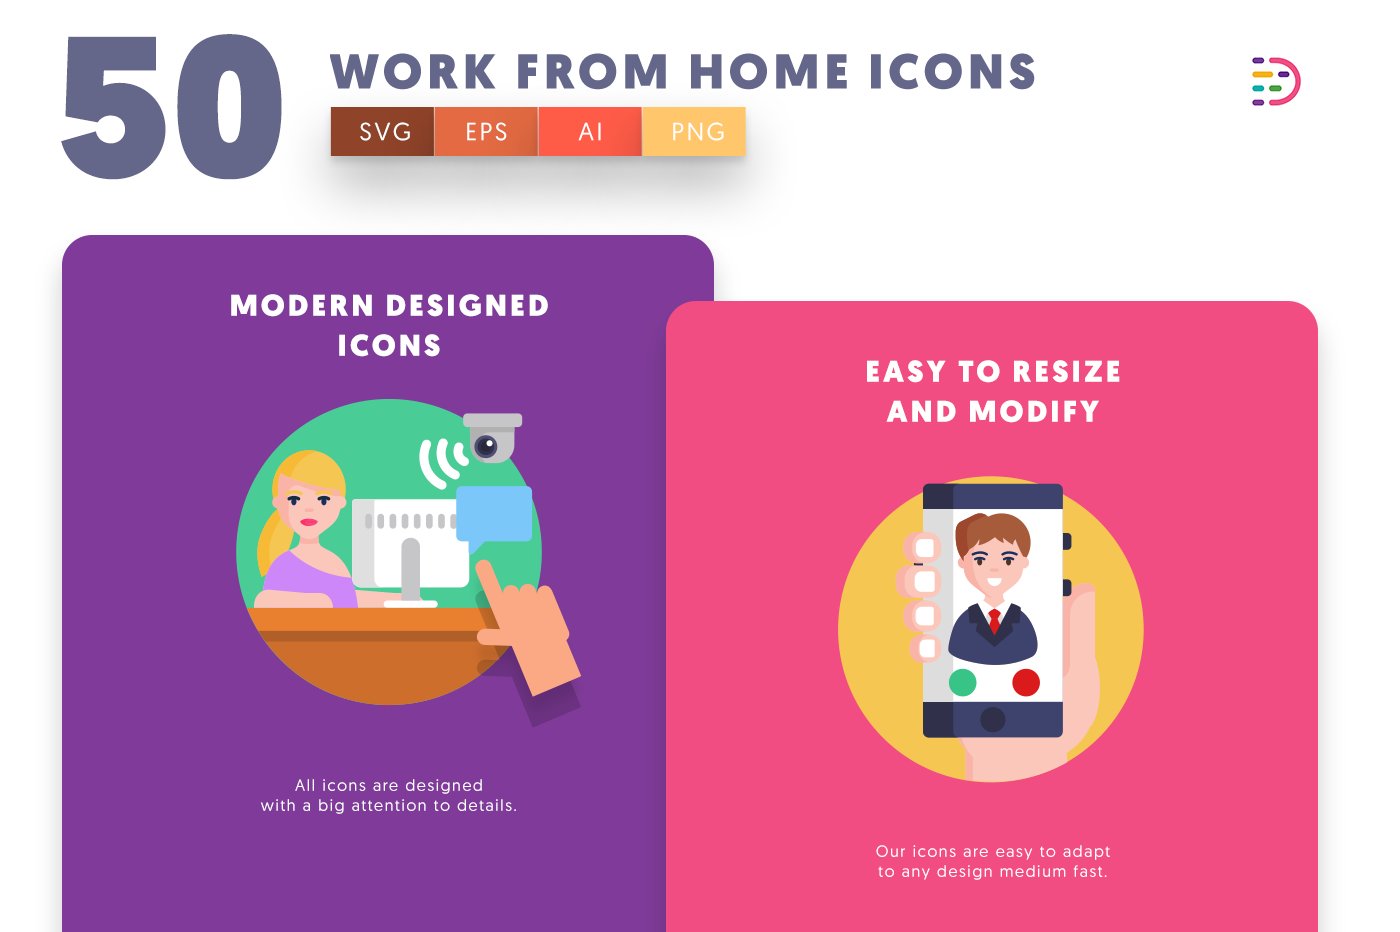 workfromhome icons cover copy 5 804